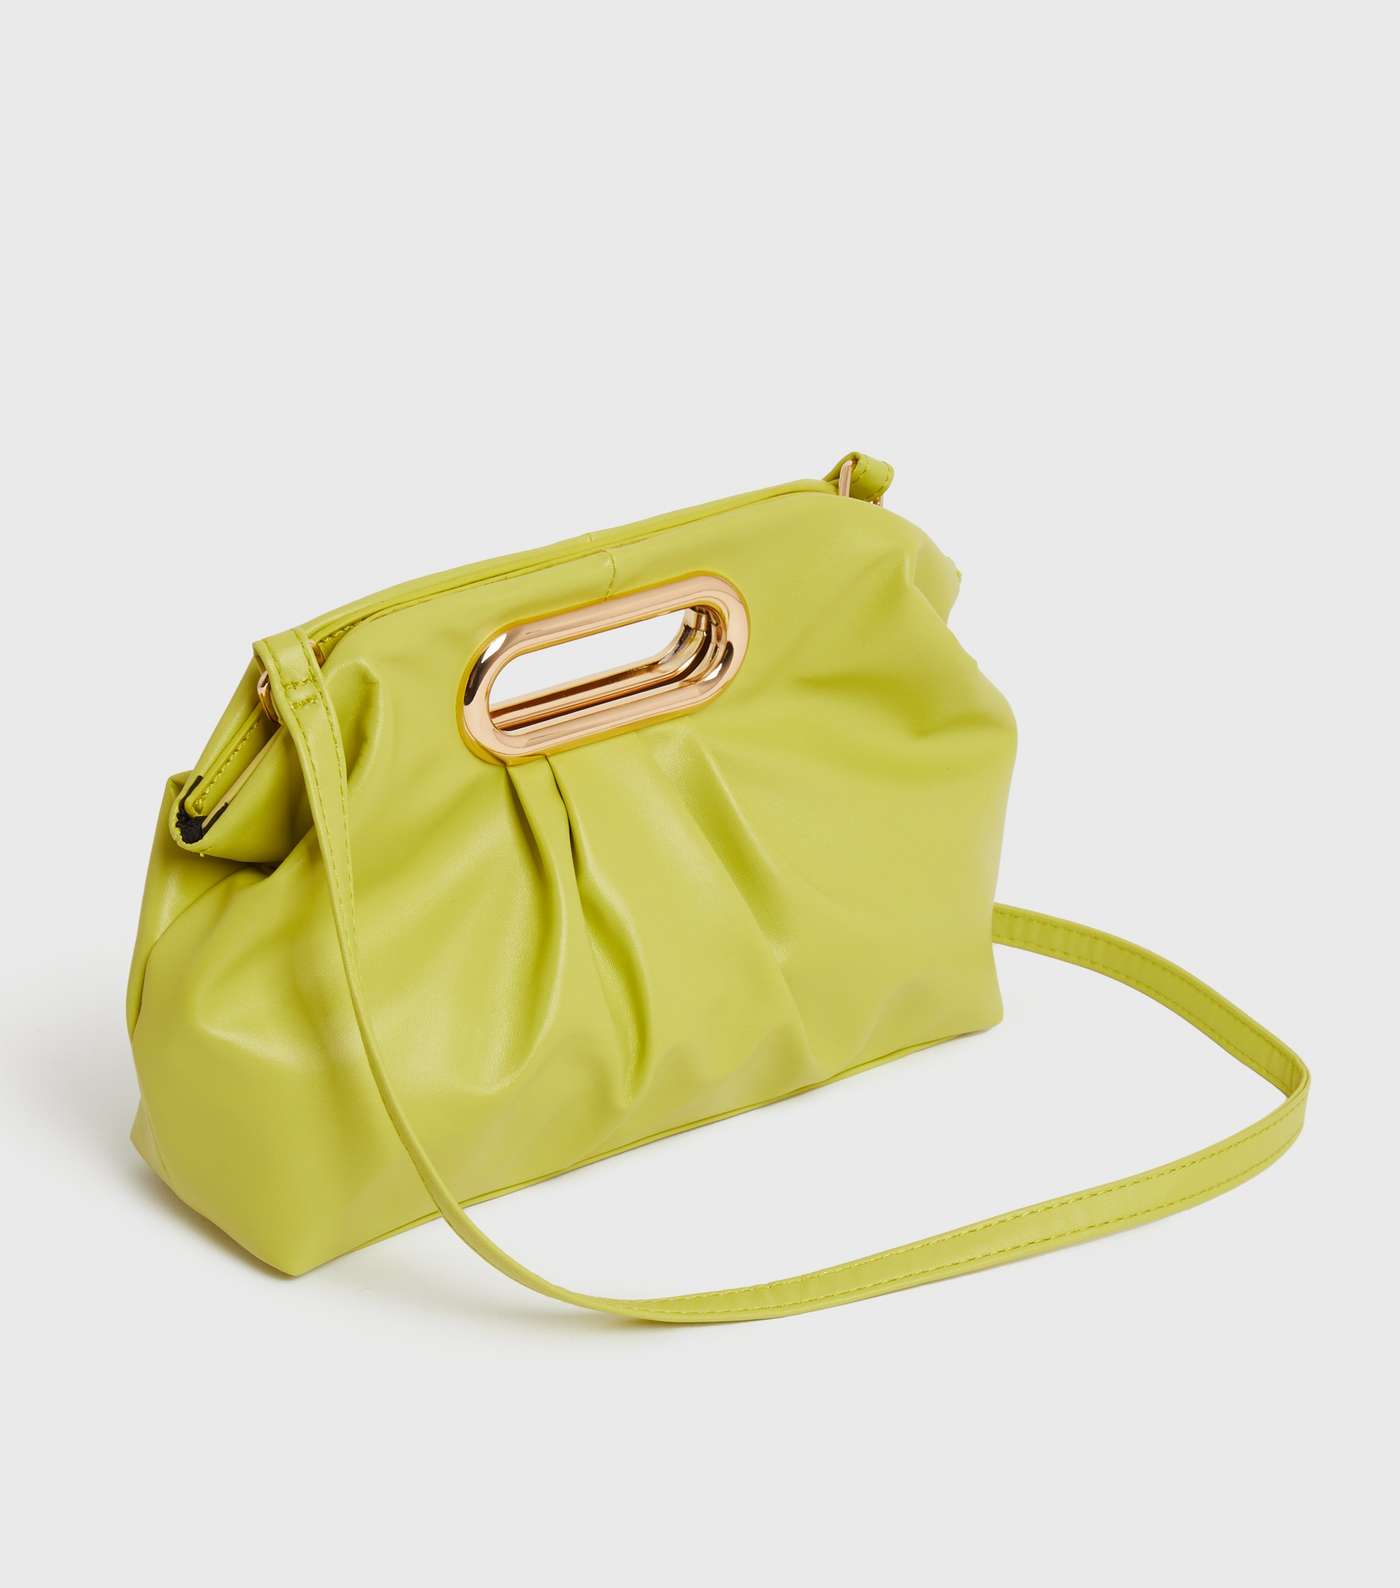 Green Leather-Look Ruched Clutch Bag Image 3